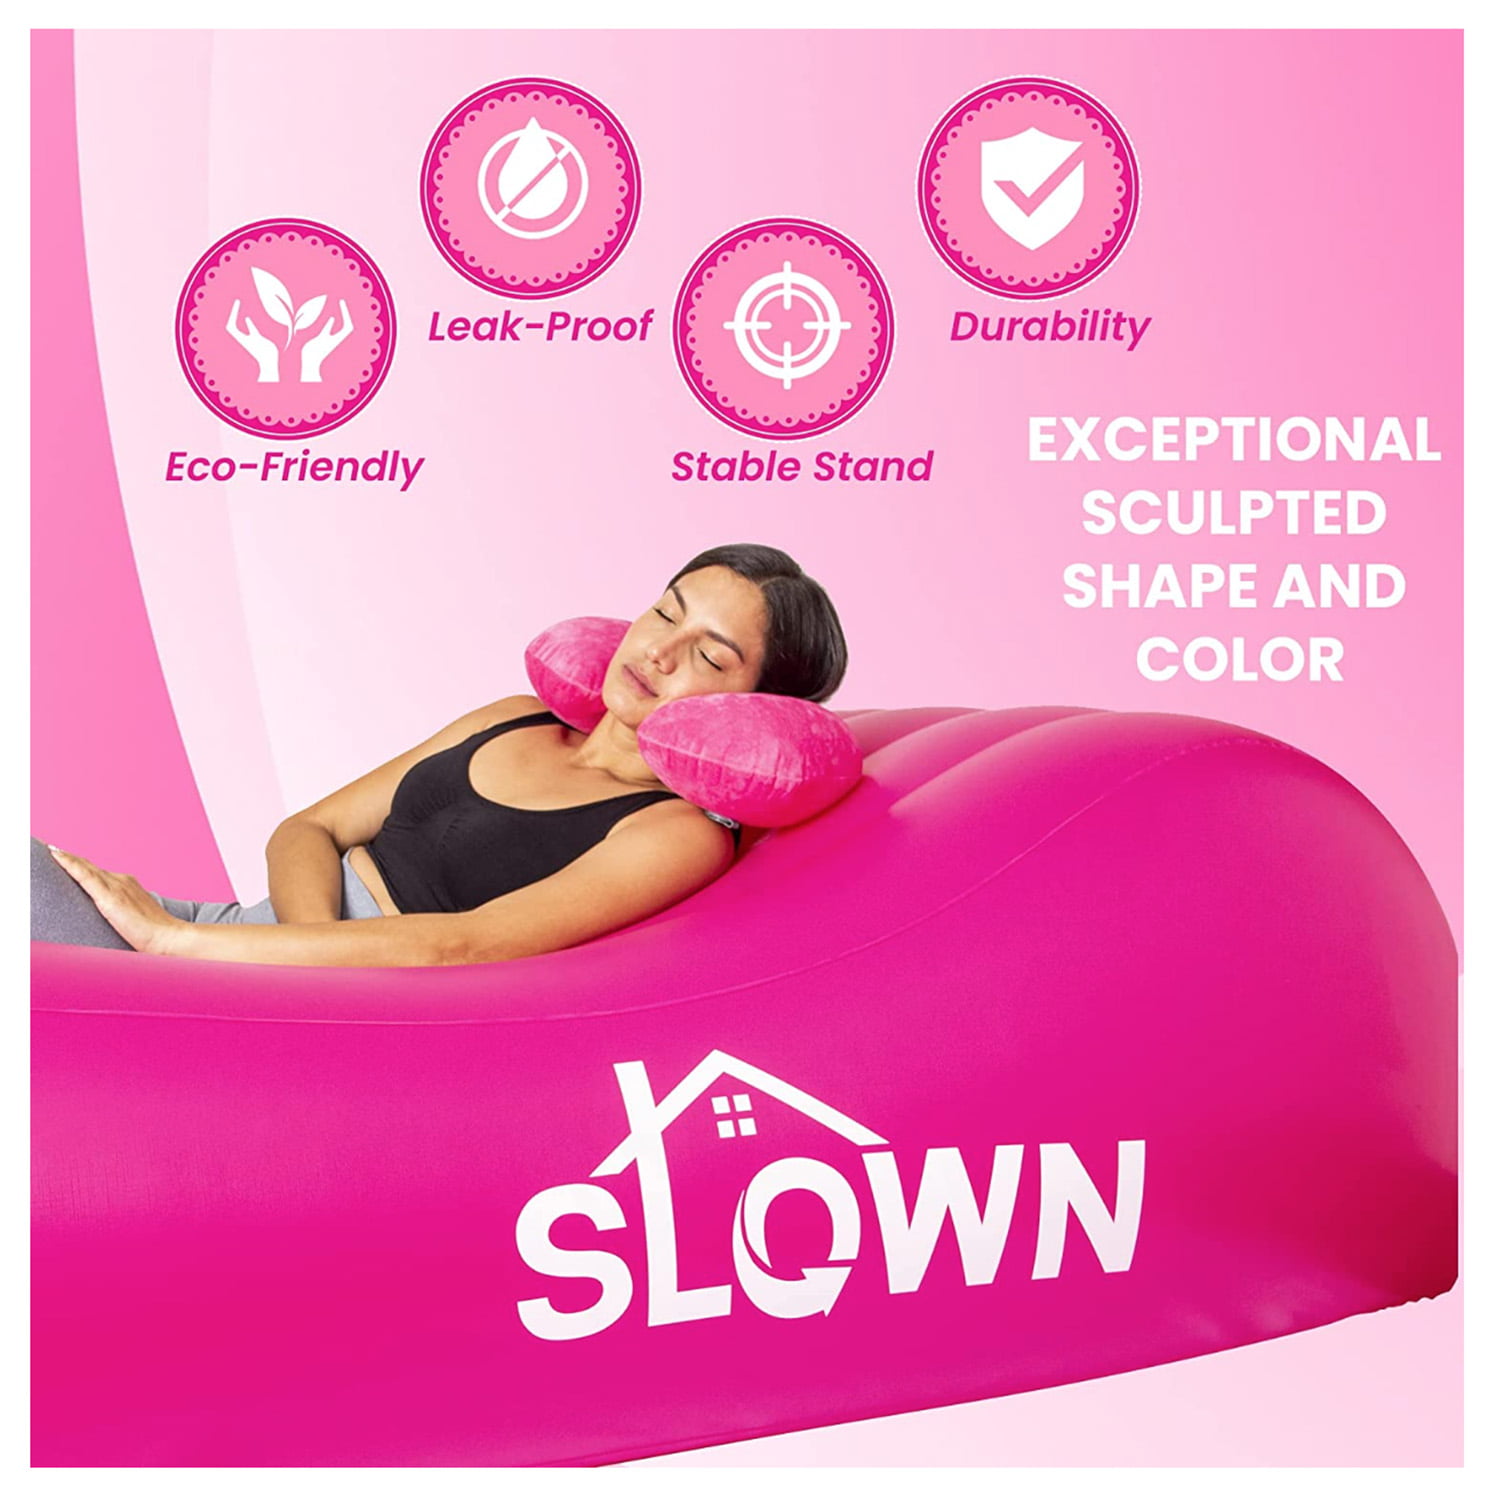  Slown BBL Chair - Inflatable BBL Mattress with Hole After  Surgery for Butt Sleeping, Brazilian Butt Lift Recovery, BBL Chair Hole  with Built-in Electric Air Pump, Neck Pillow and Urination Device 